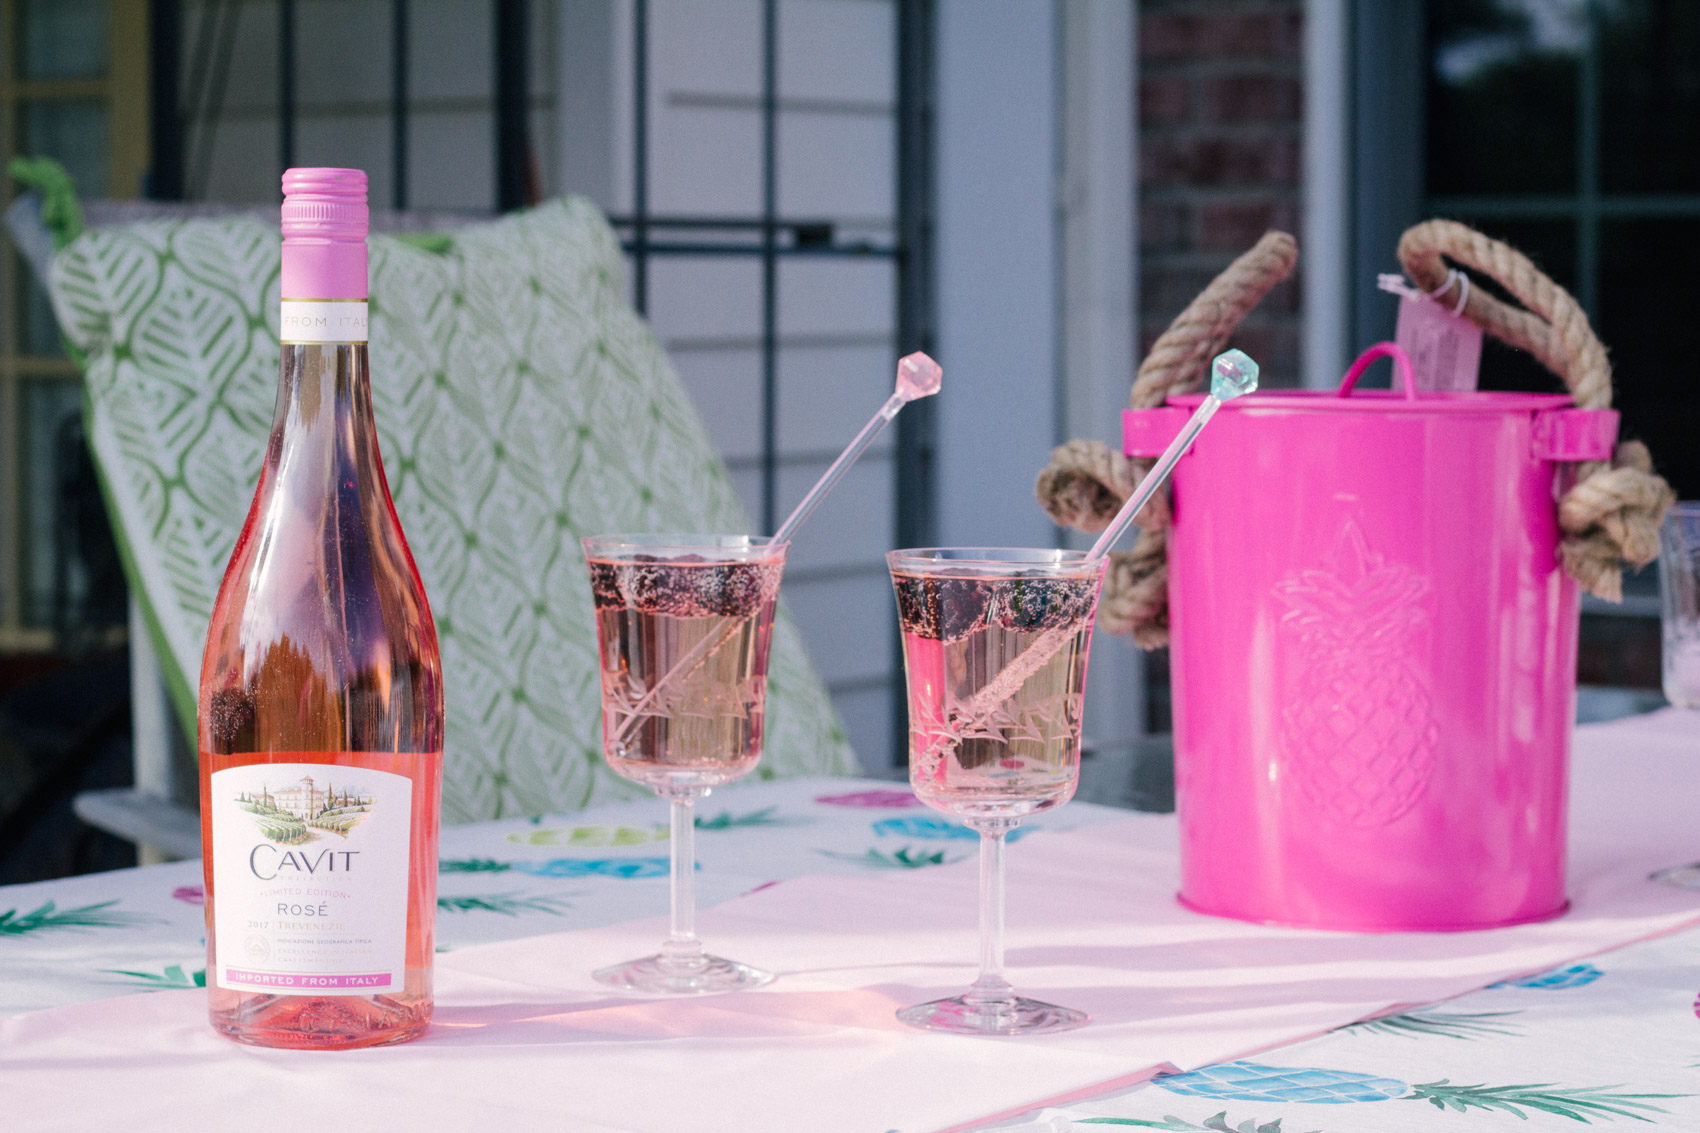 When it's your turn to host the summer entertaining or party, it can be a bit intimidating. That is, of course, only if you don't know about these 6 must-haves! From drinks to ambiance to clothing, you'll find a little bit of everything in here to have your guests (and you) craving more time on your deck!